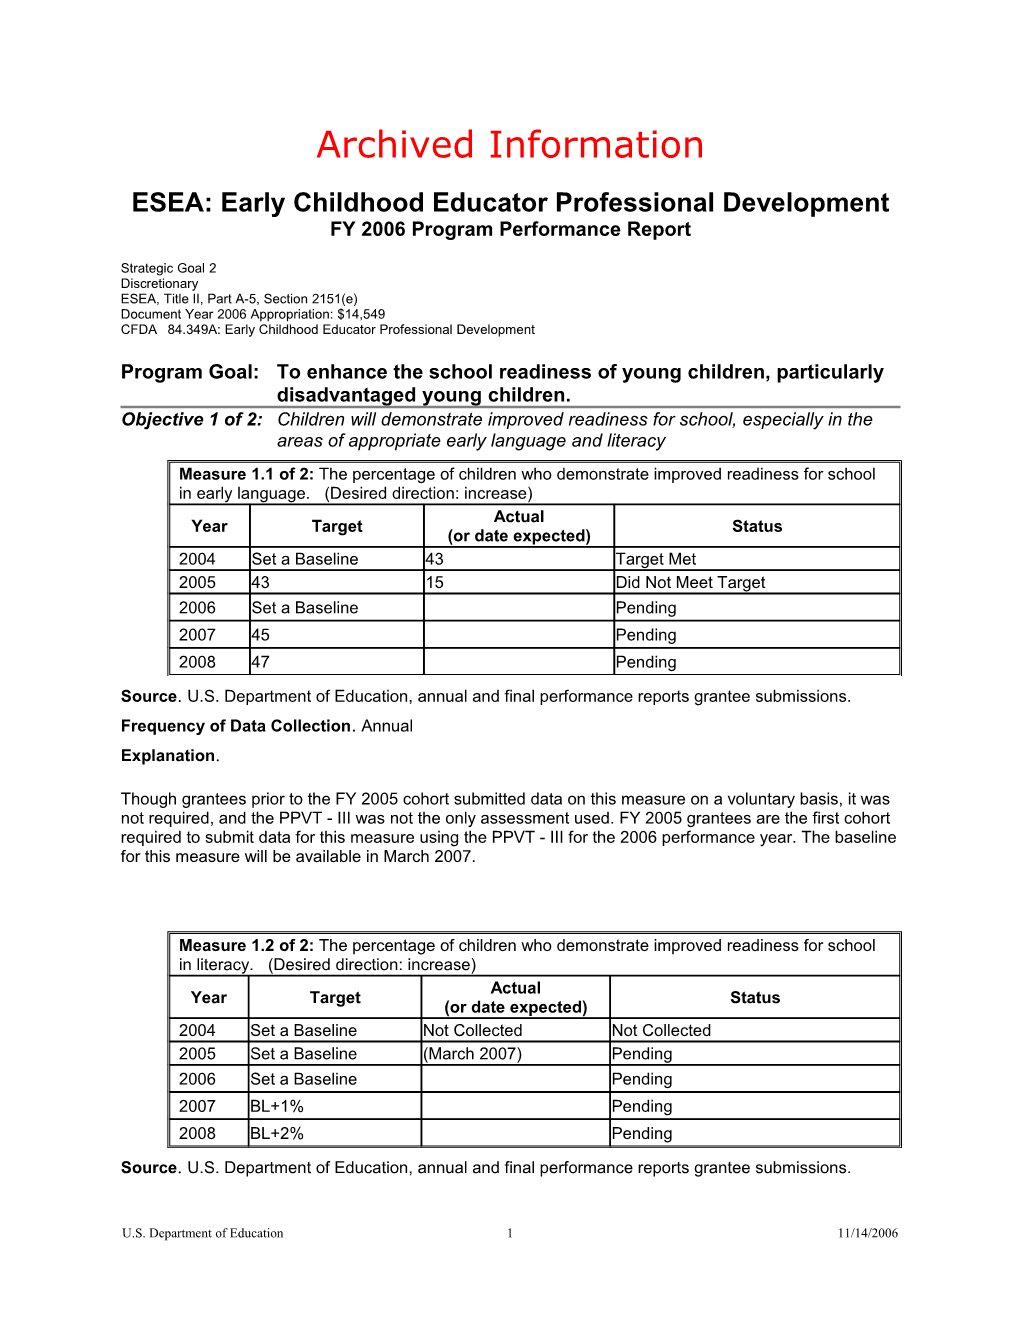 Archived: ESEA: Early Childhood Educator Professional Development